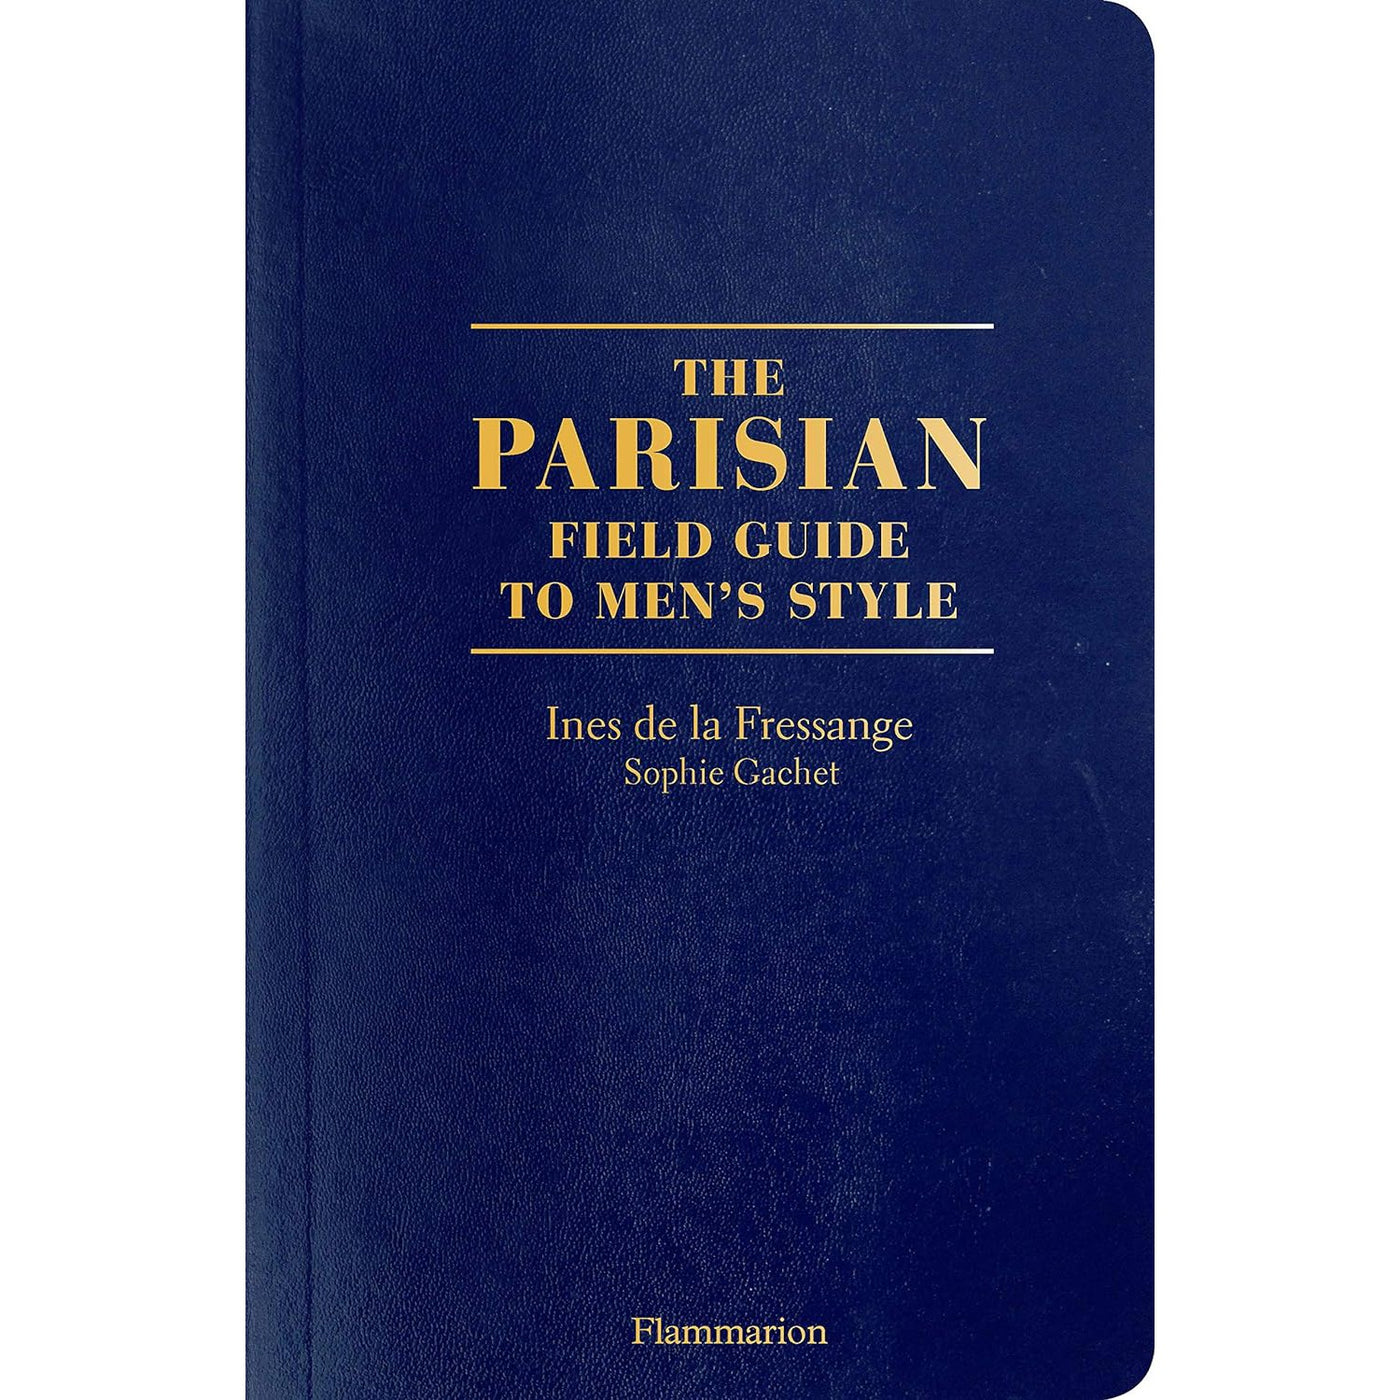 The Parisian Field Guide To Men's Style